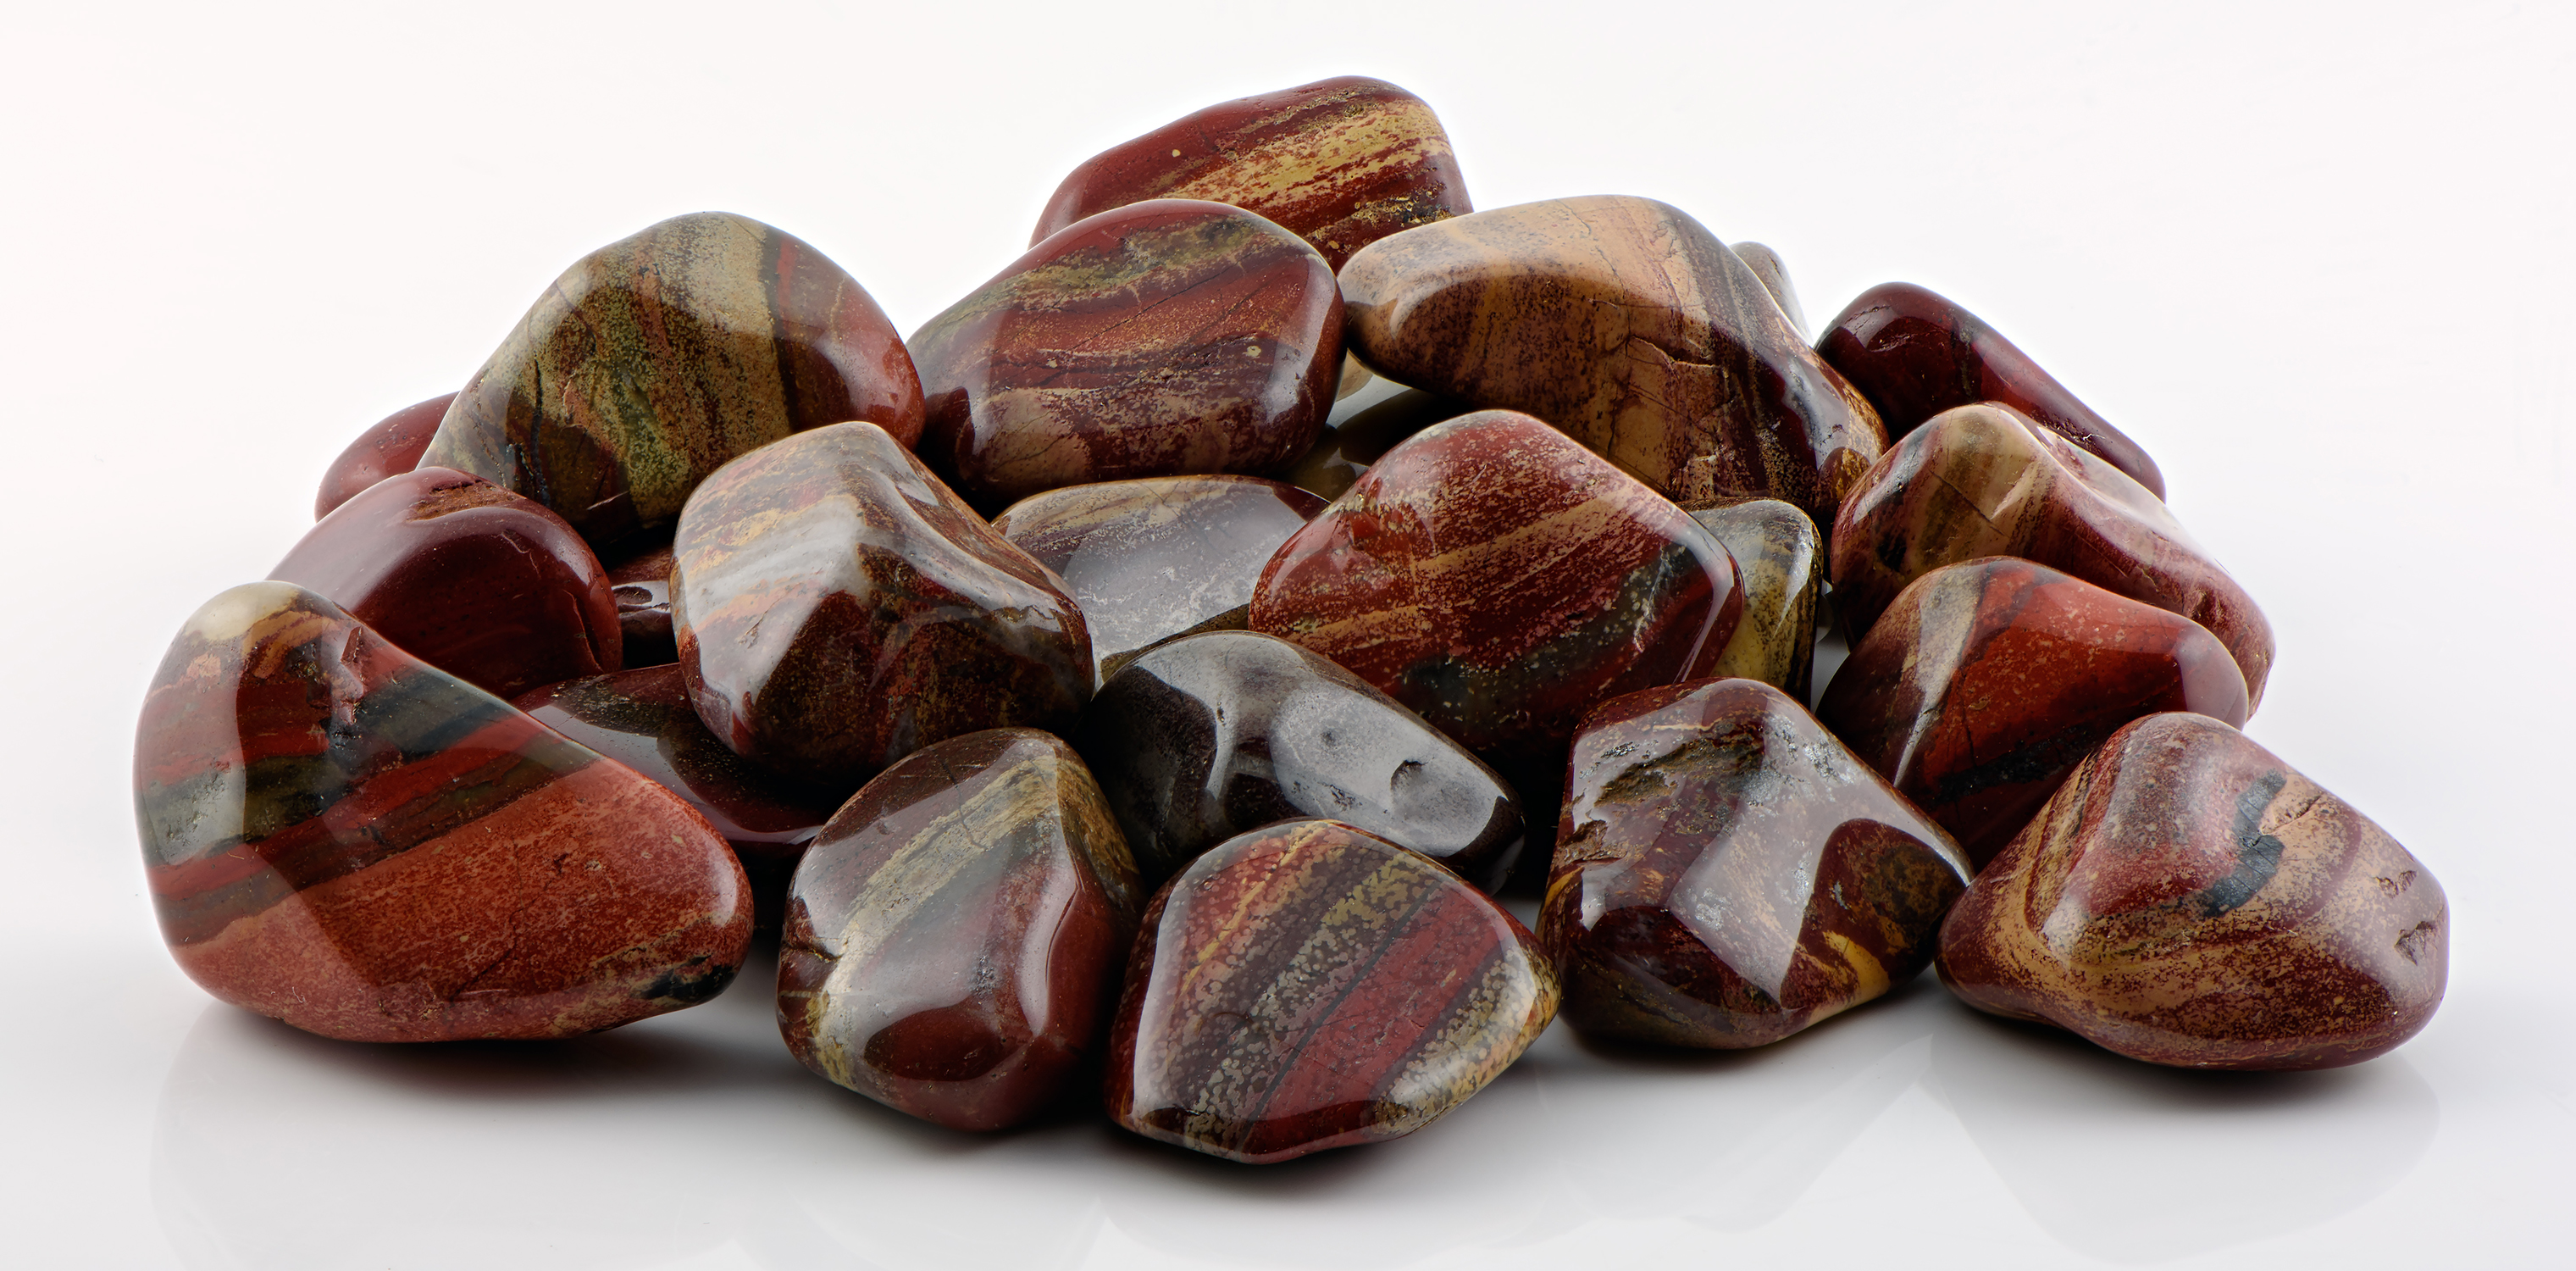 Jasper and Sardine Stones: Case Closed on The Color of The Creator